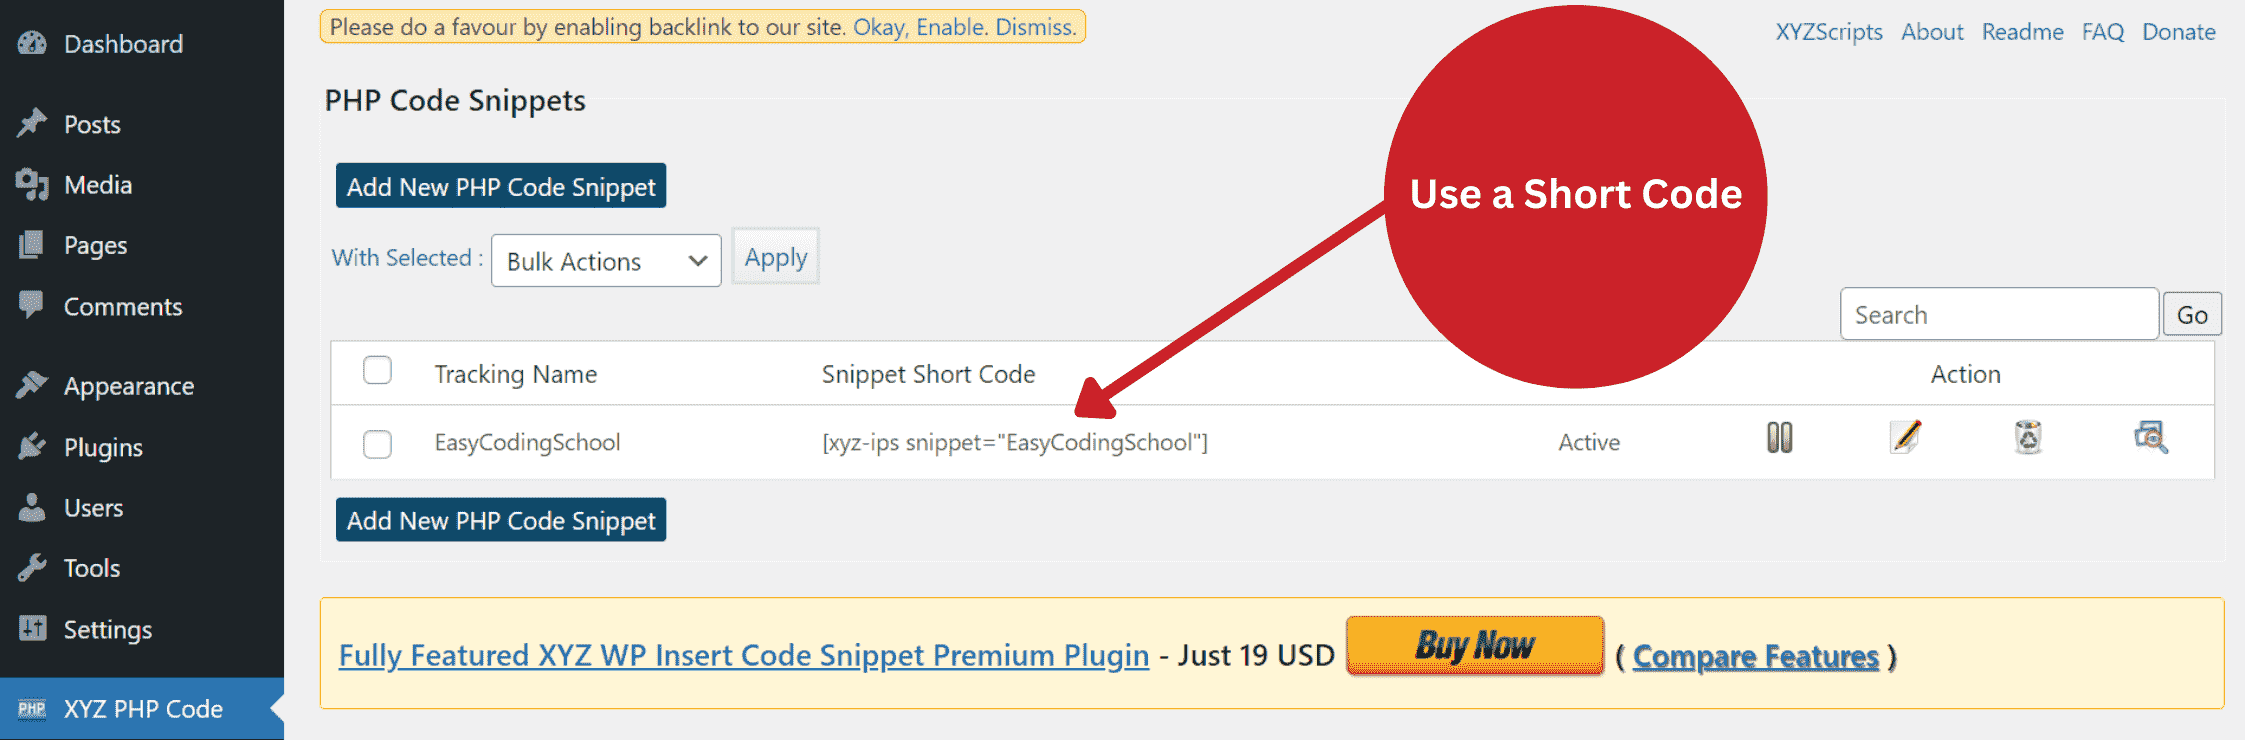 Use Short Code the Insert PHP Code Snippet